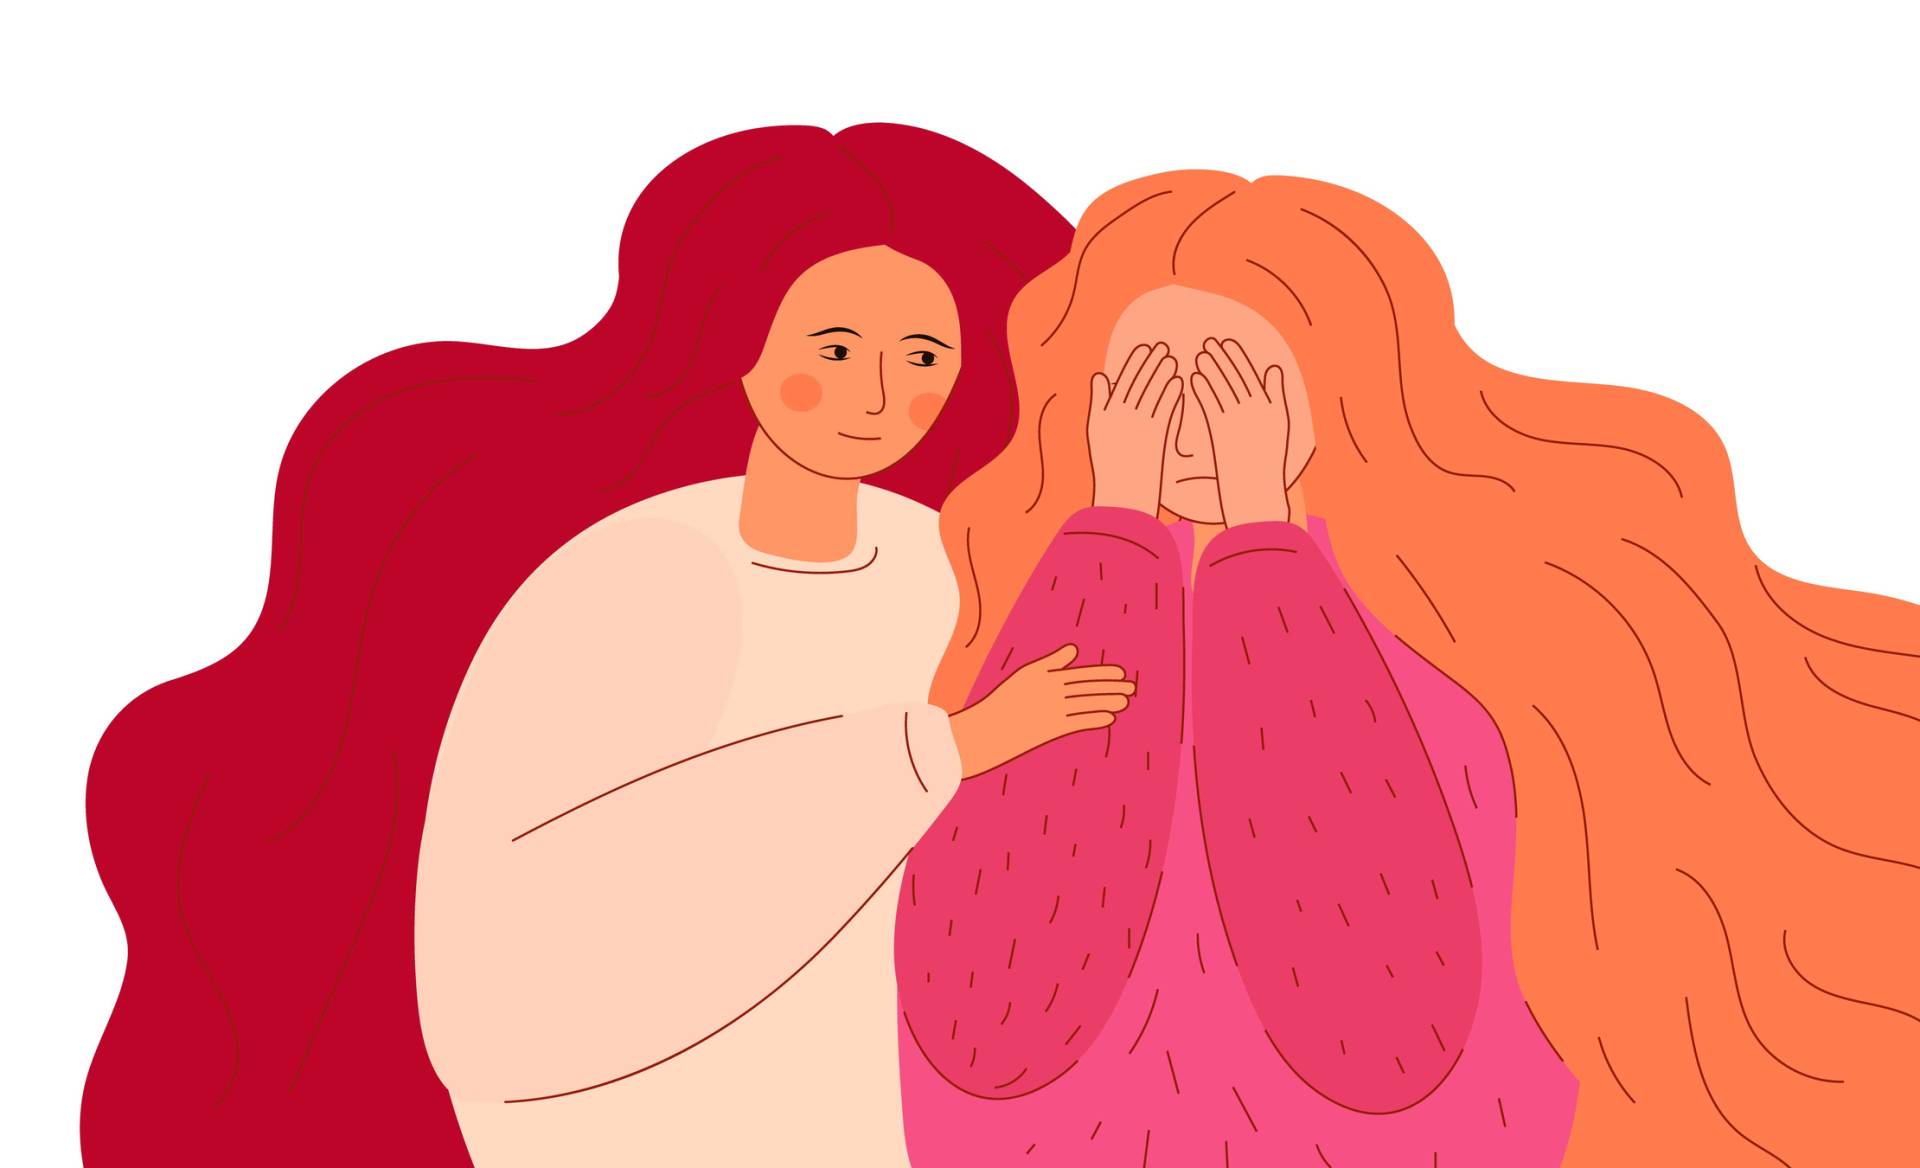 Illustration of a woman crying and another woman comforting her.